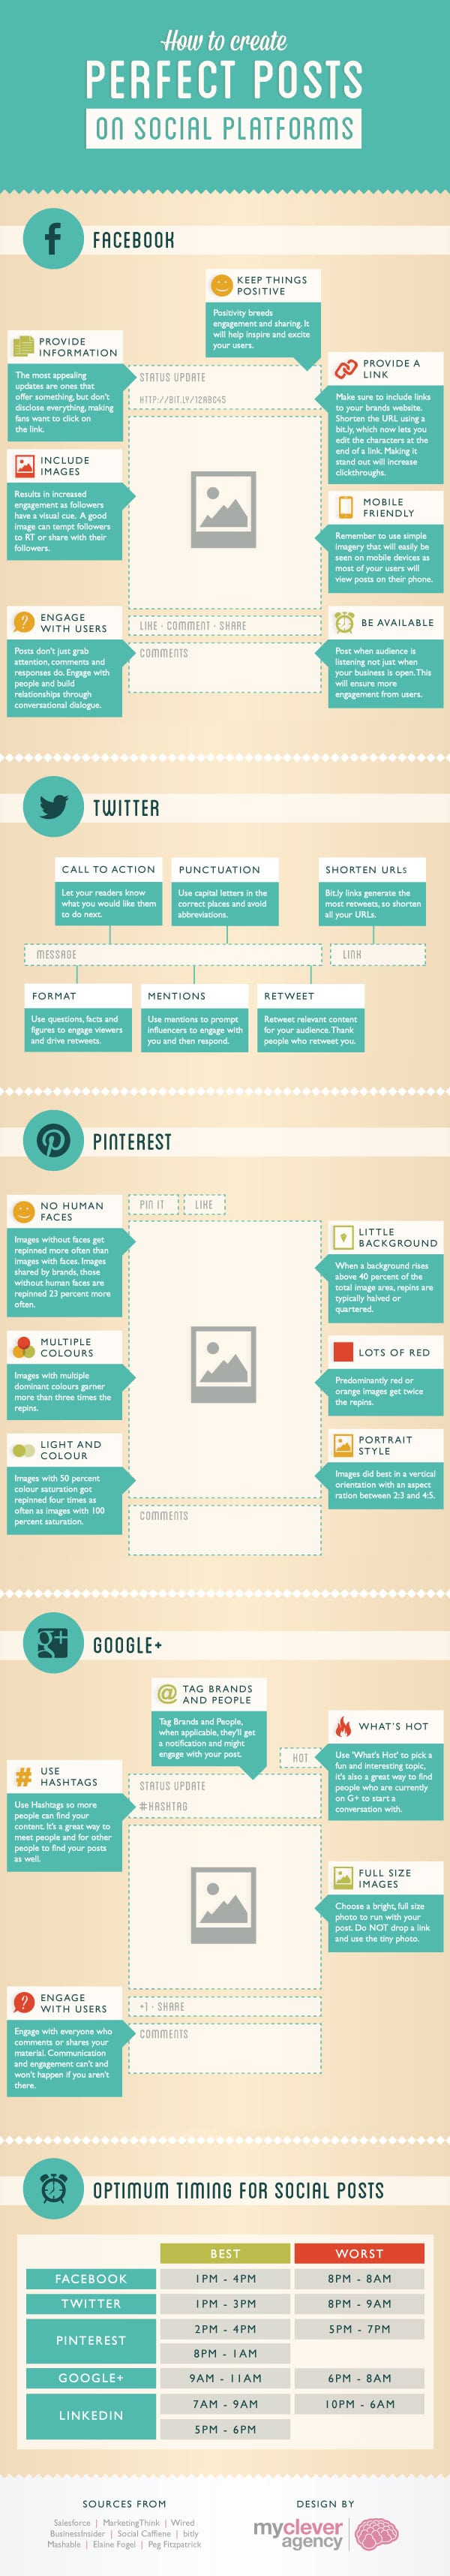 How To Create Effective Posts On The 4 Main Social Sites [Infographic]